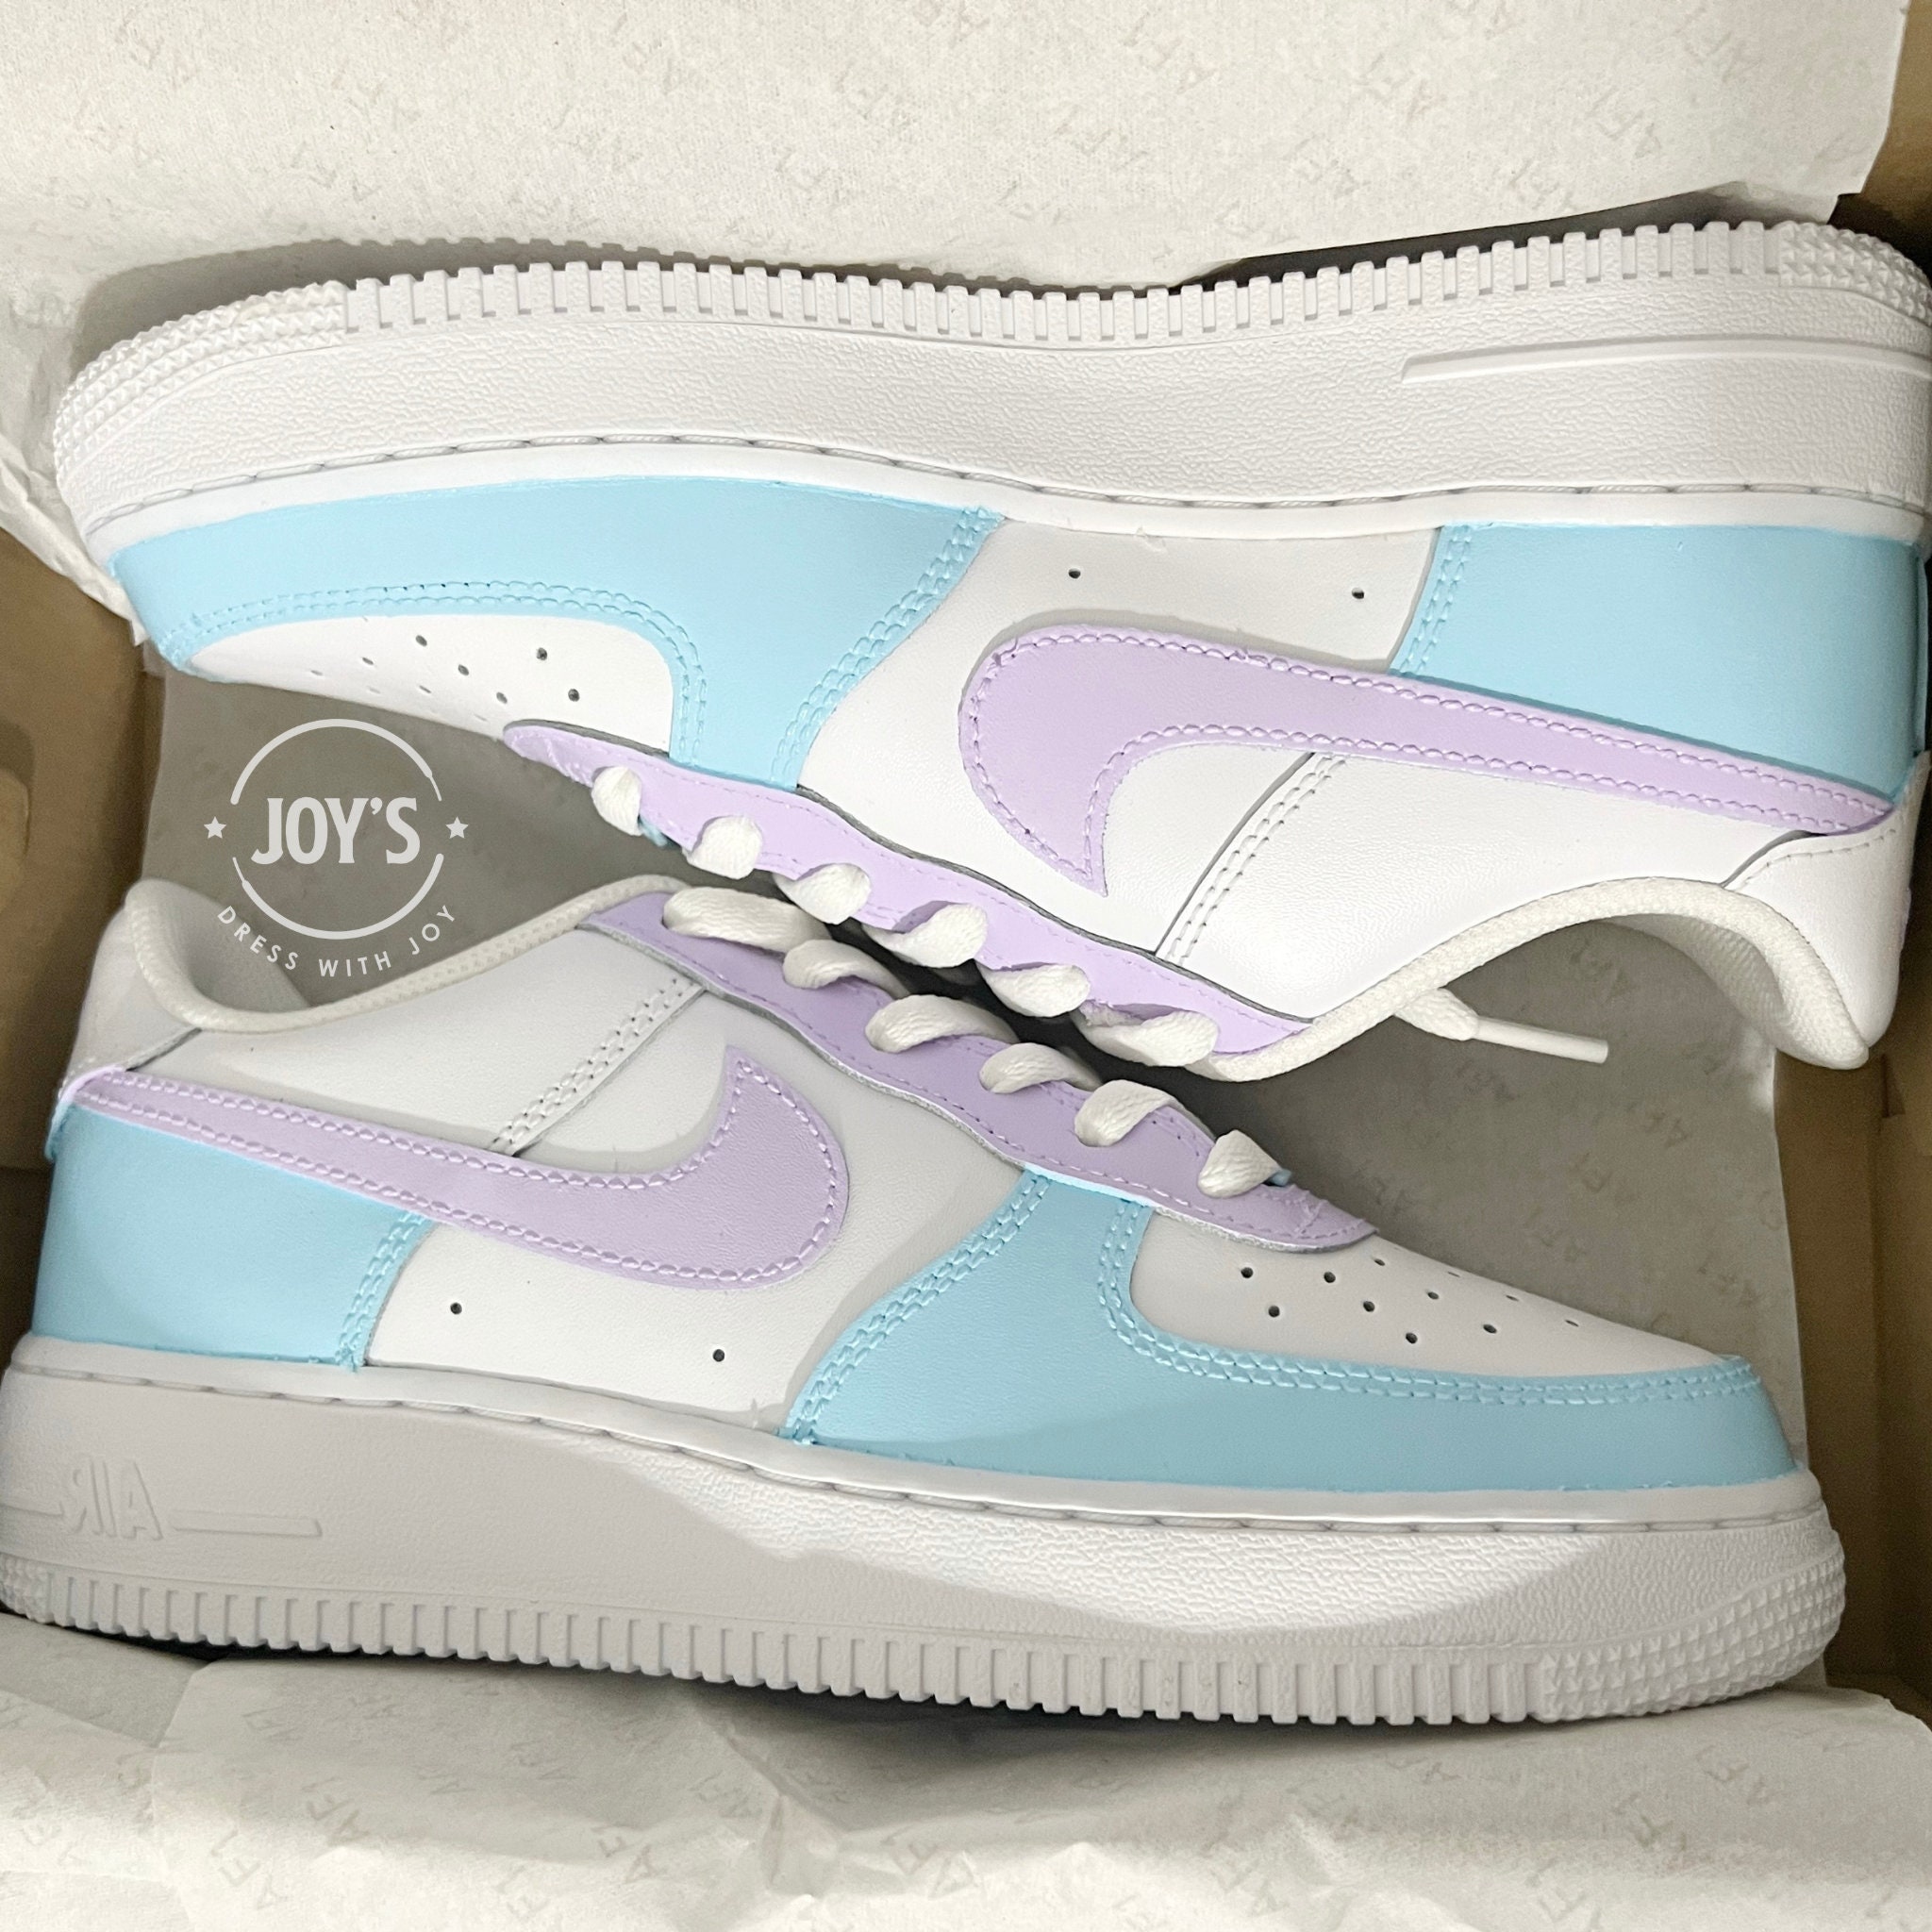 Nike Air Force 1 Low Iced Lilac 823511-500